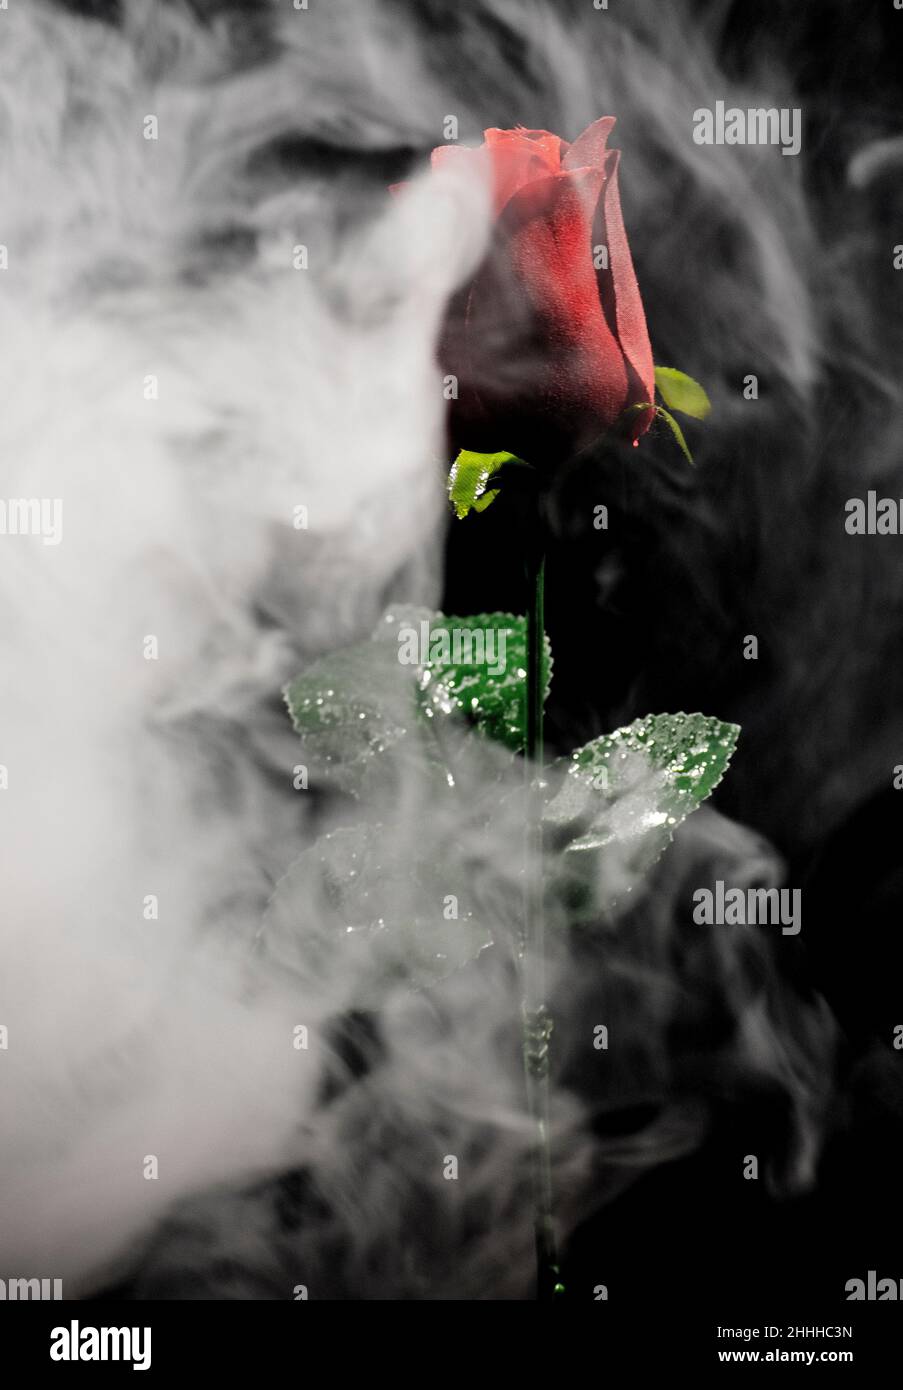 This photo created by using actual smoke and a red rose, giving the image a mystical appearance, ideal for a poster Stock Photo